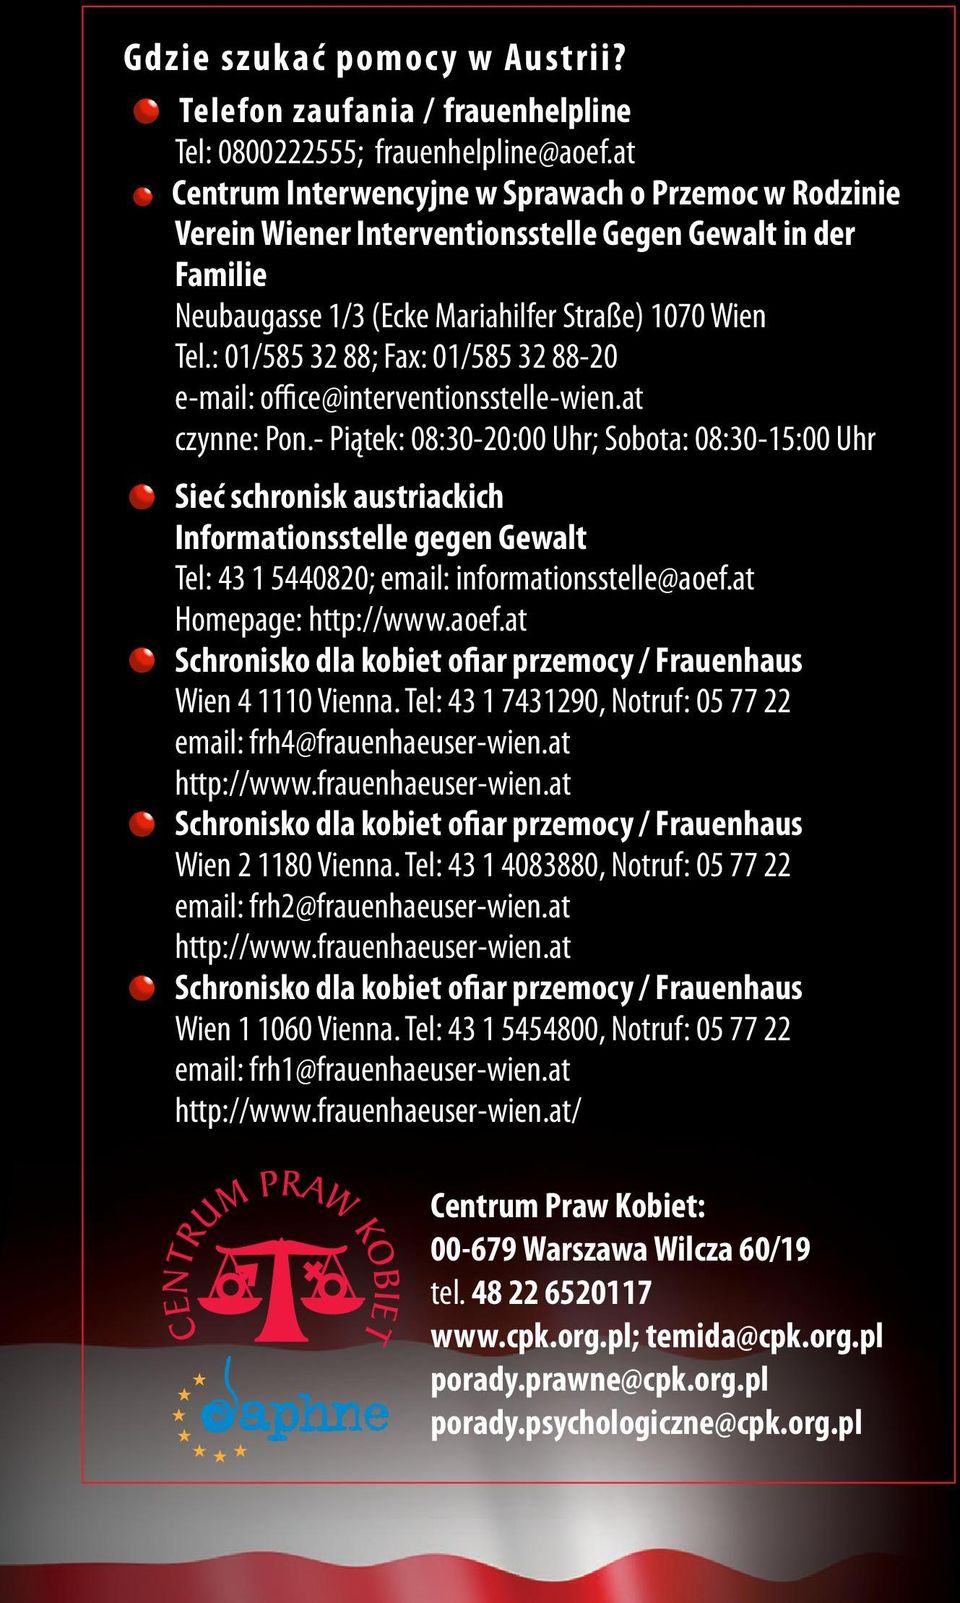 : 01/585 32 88; Fax: 01/585 32 88-20 e-mail: office@interventionsstelle-wien.at czynne: Pon.